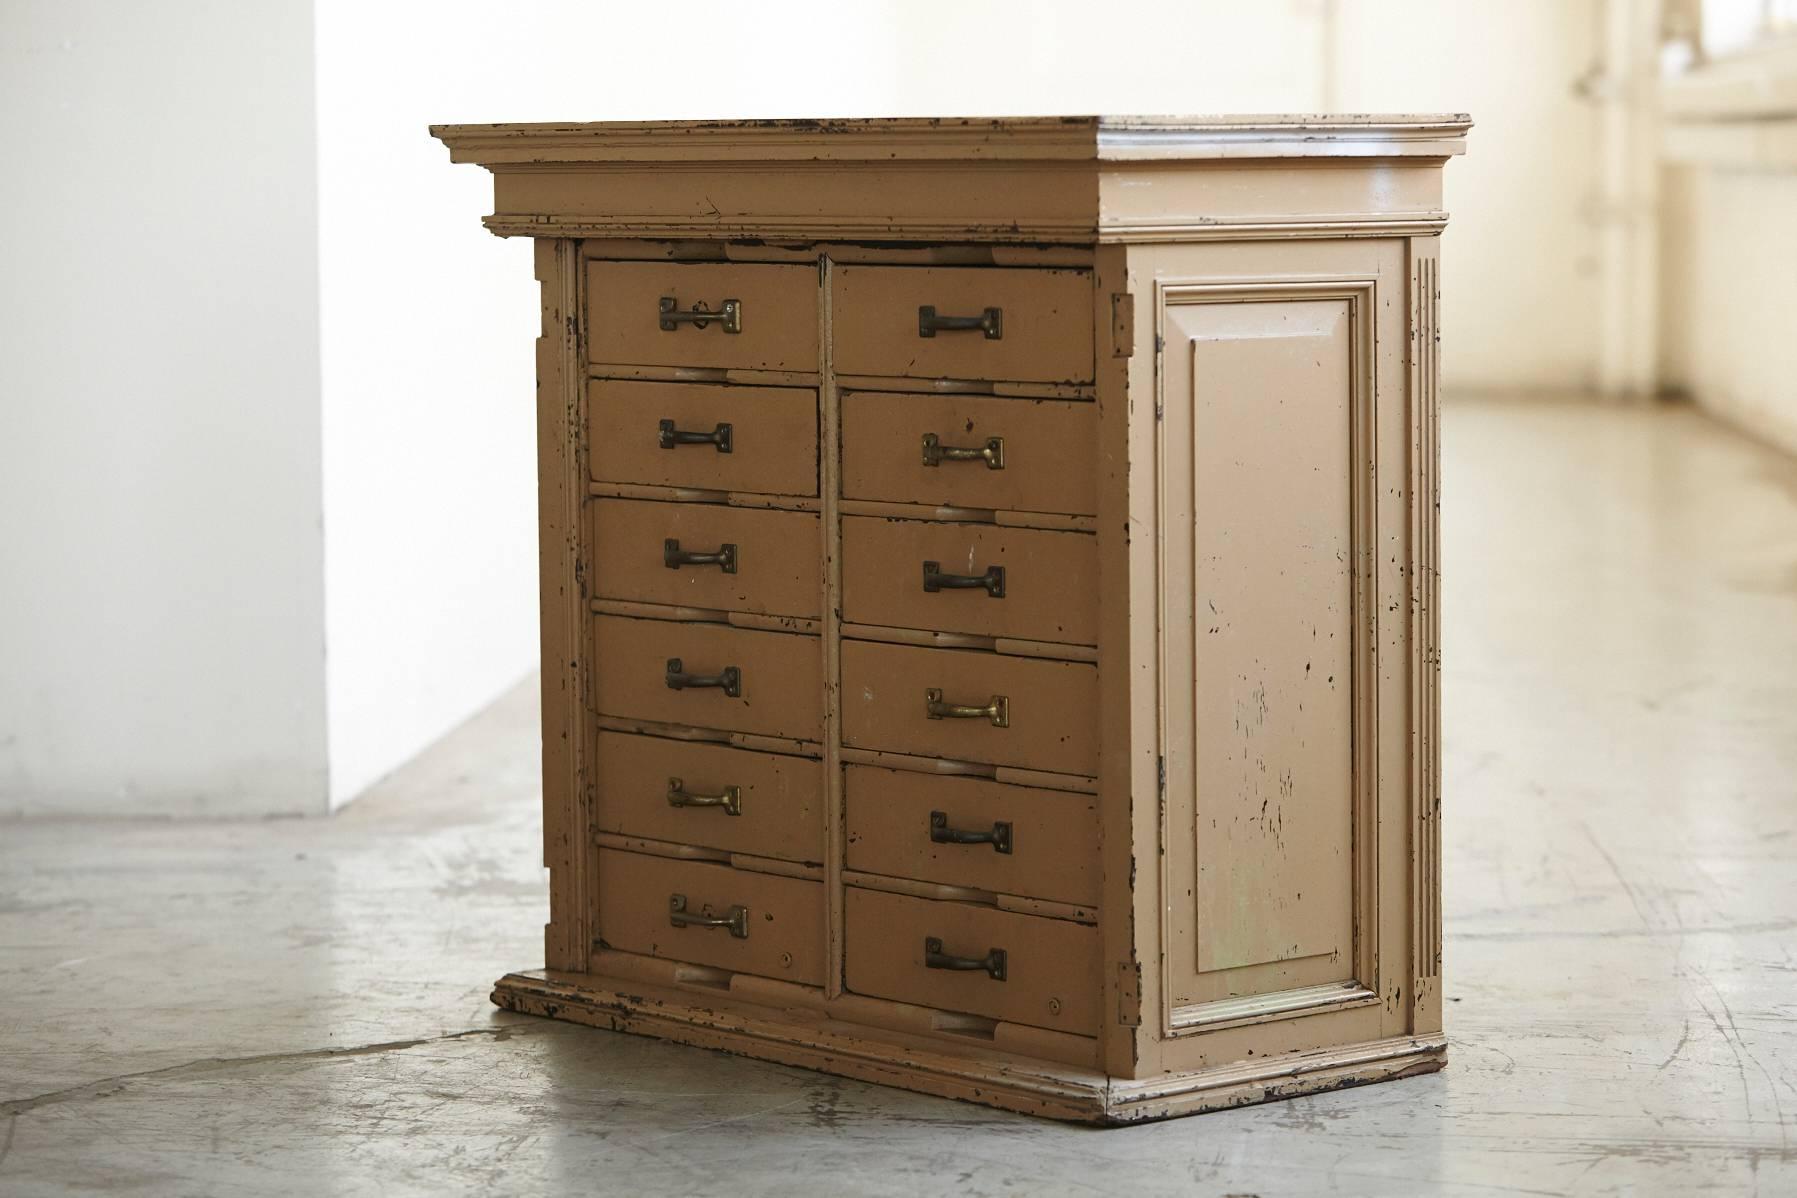 Industrial Original Paint 12-Drawer Cabinet in a Distressed Look